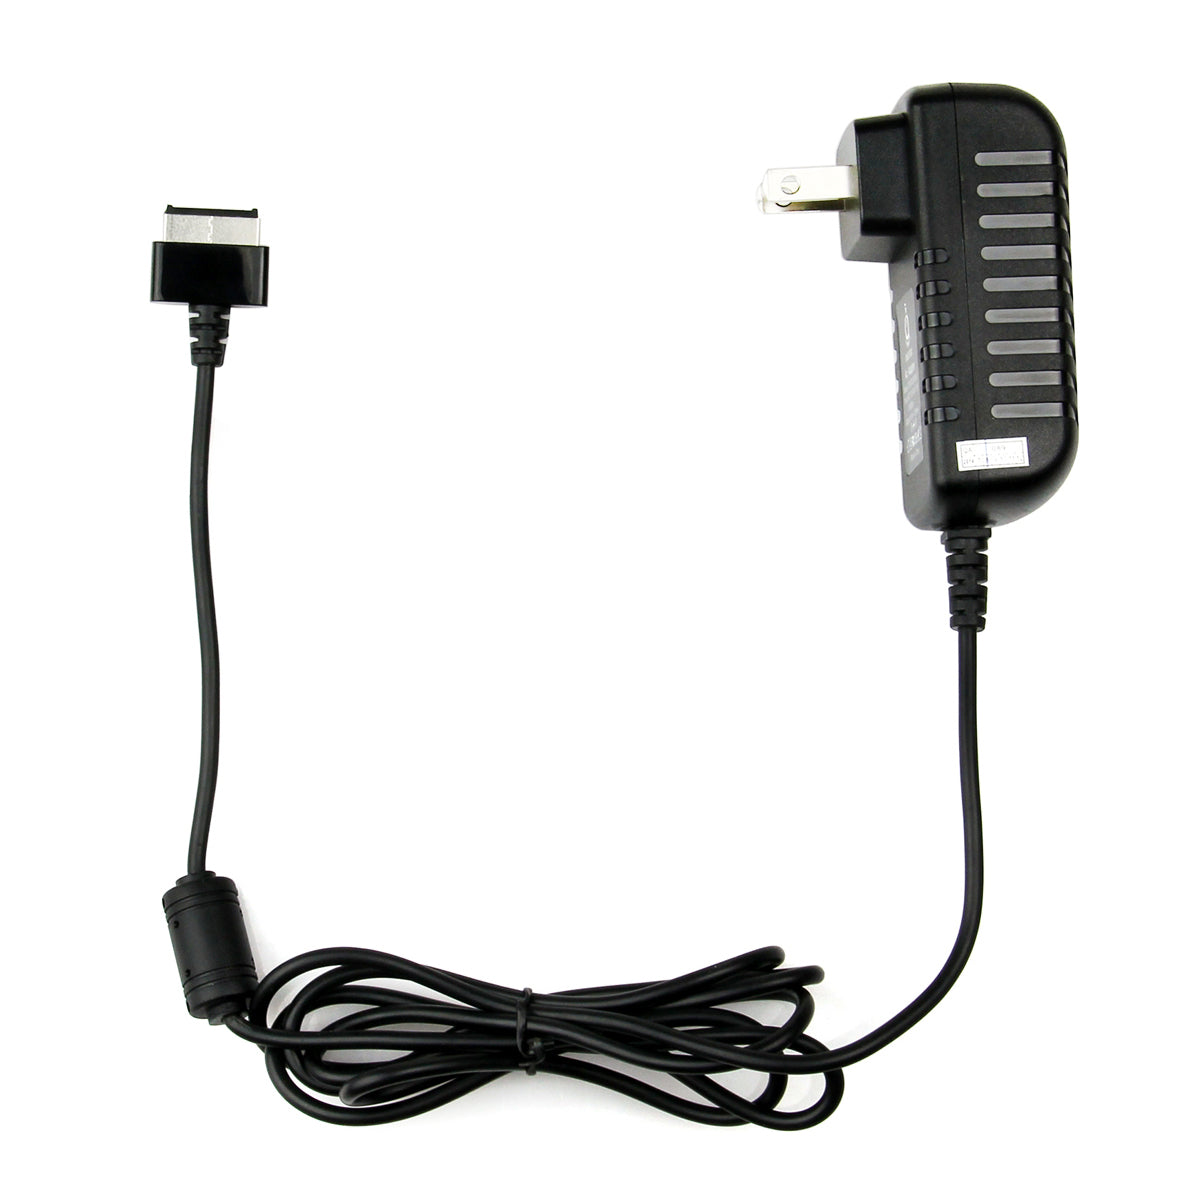 AC Adapter Charger for ASUS TF700T A1 Eee Pad.